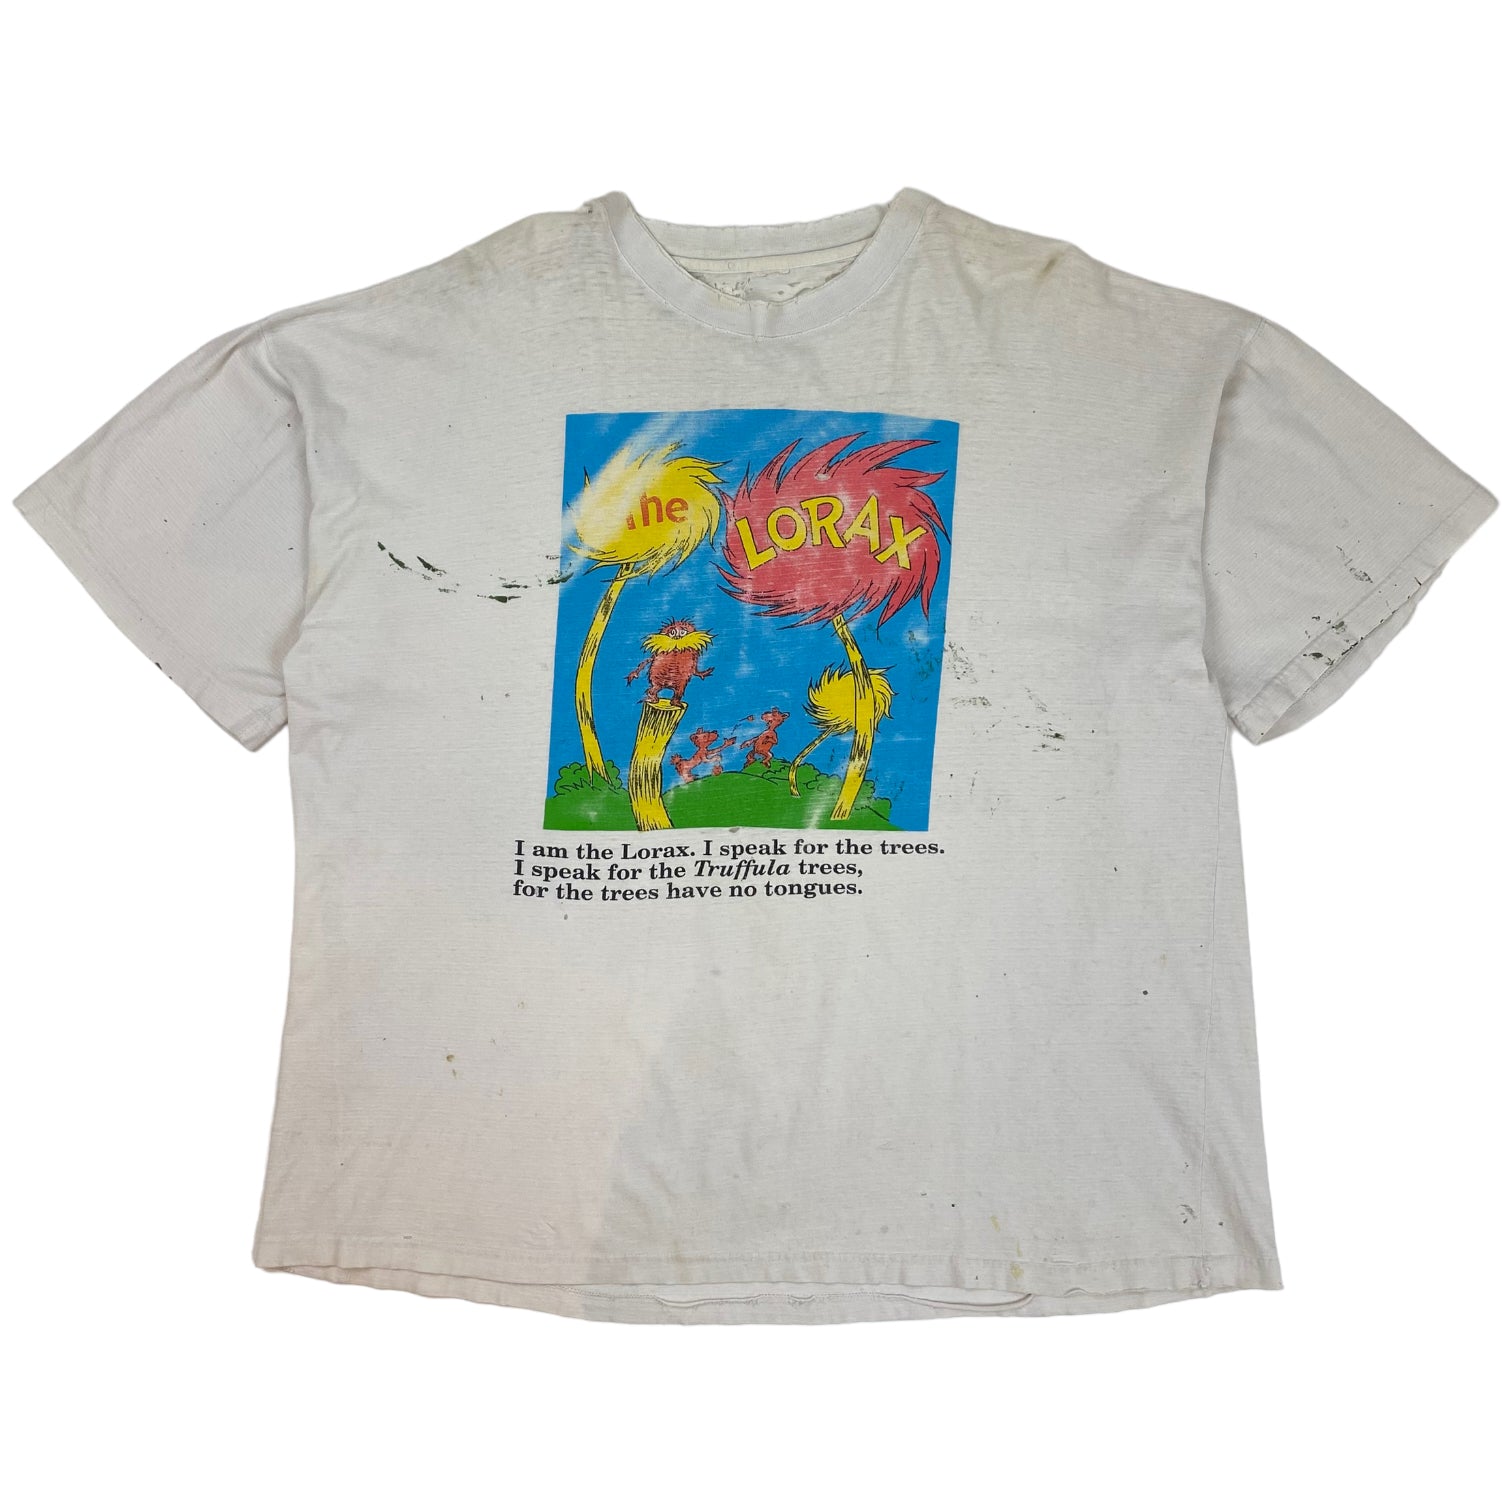 Vintage The Lorax T-Shirt White